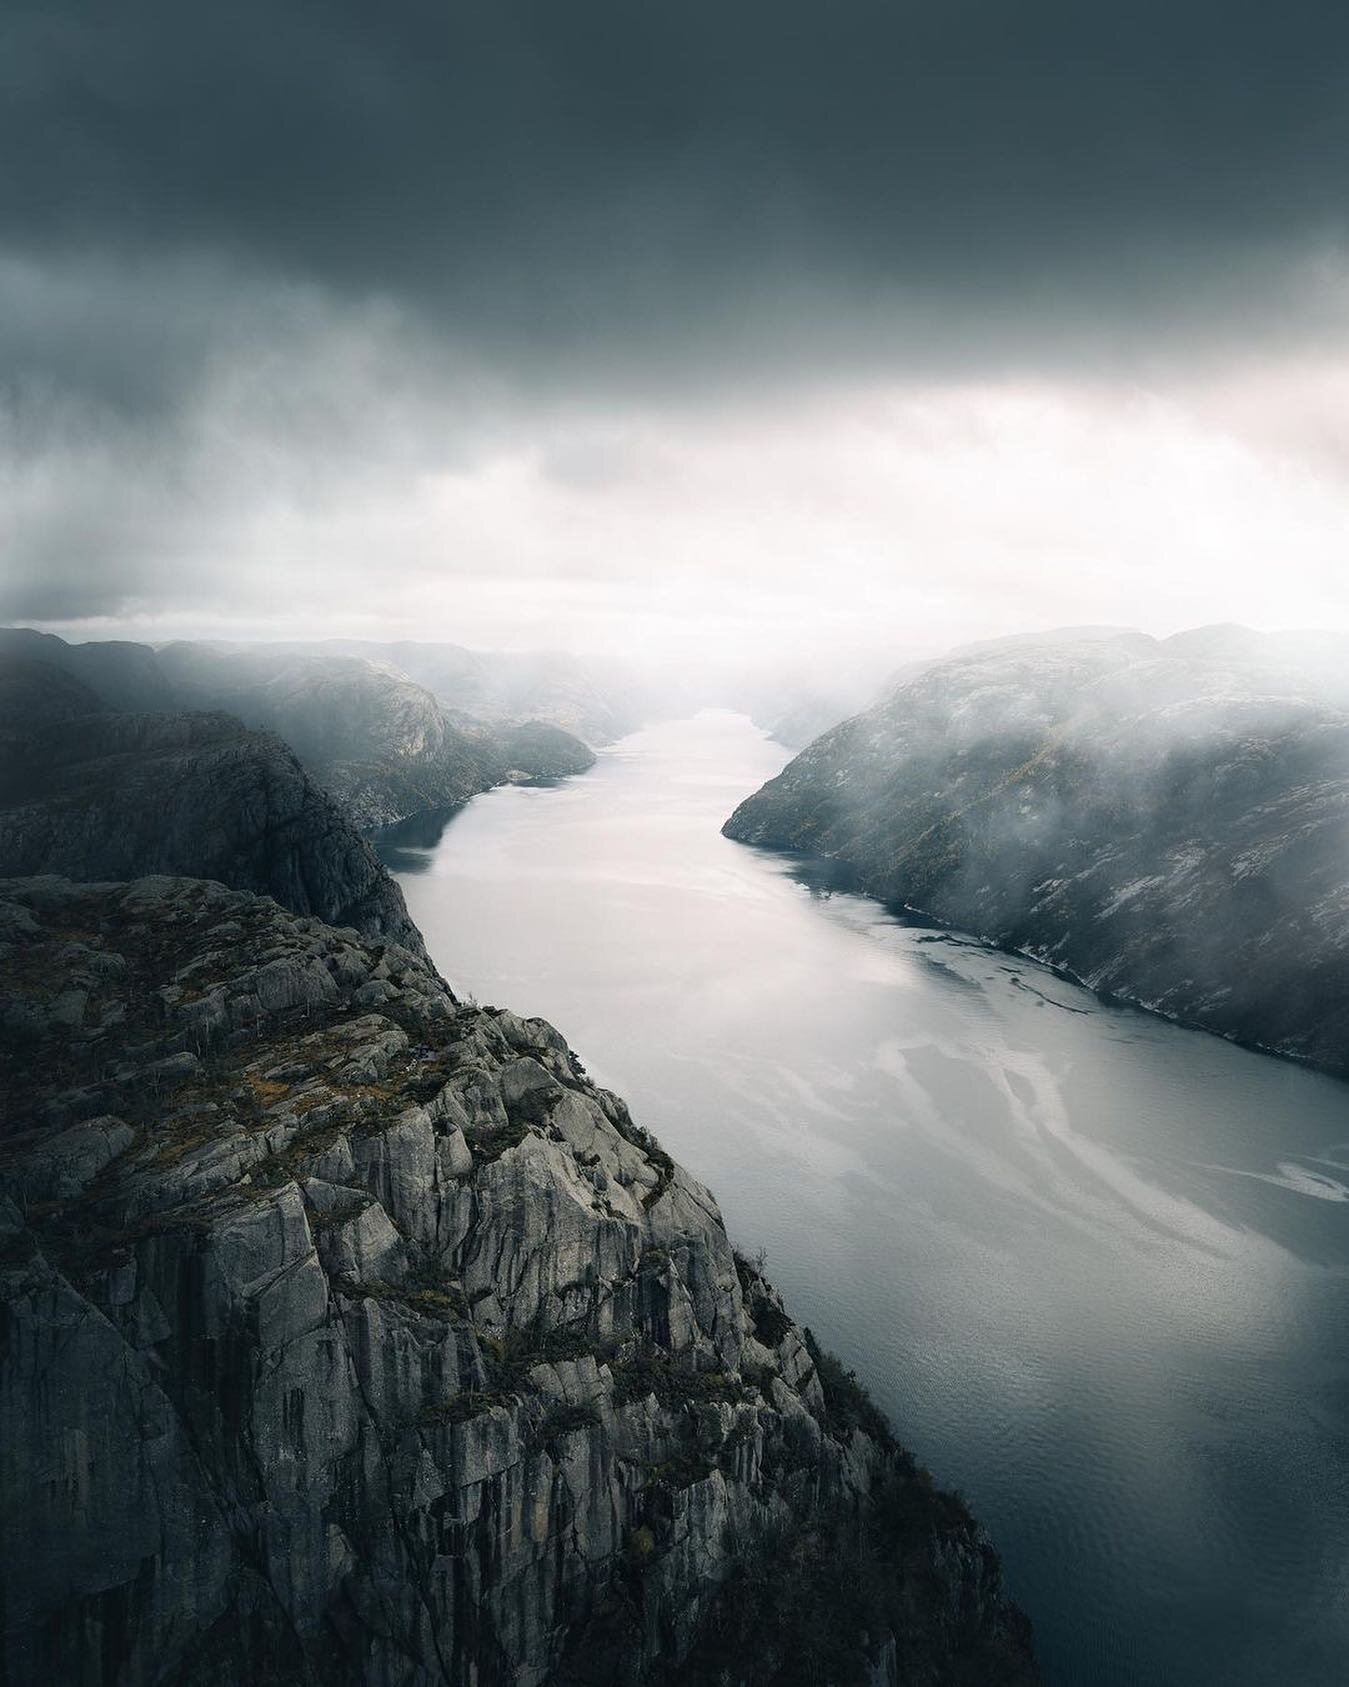 @joinolli With its lightly colored granite walls drenched in recondite black, Lysefjorden provided an initimidating display on this stormy day. Impressive and inviolable. Ever lasting ridges overlooking powerful efforts of long gone glaciers. Ice seg